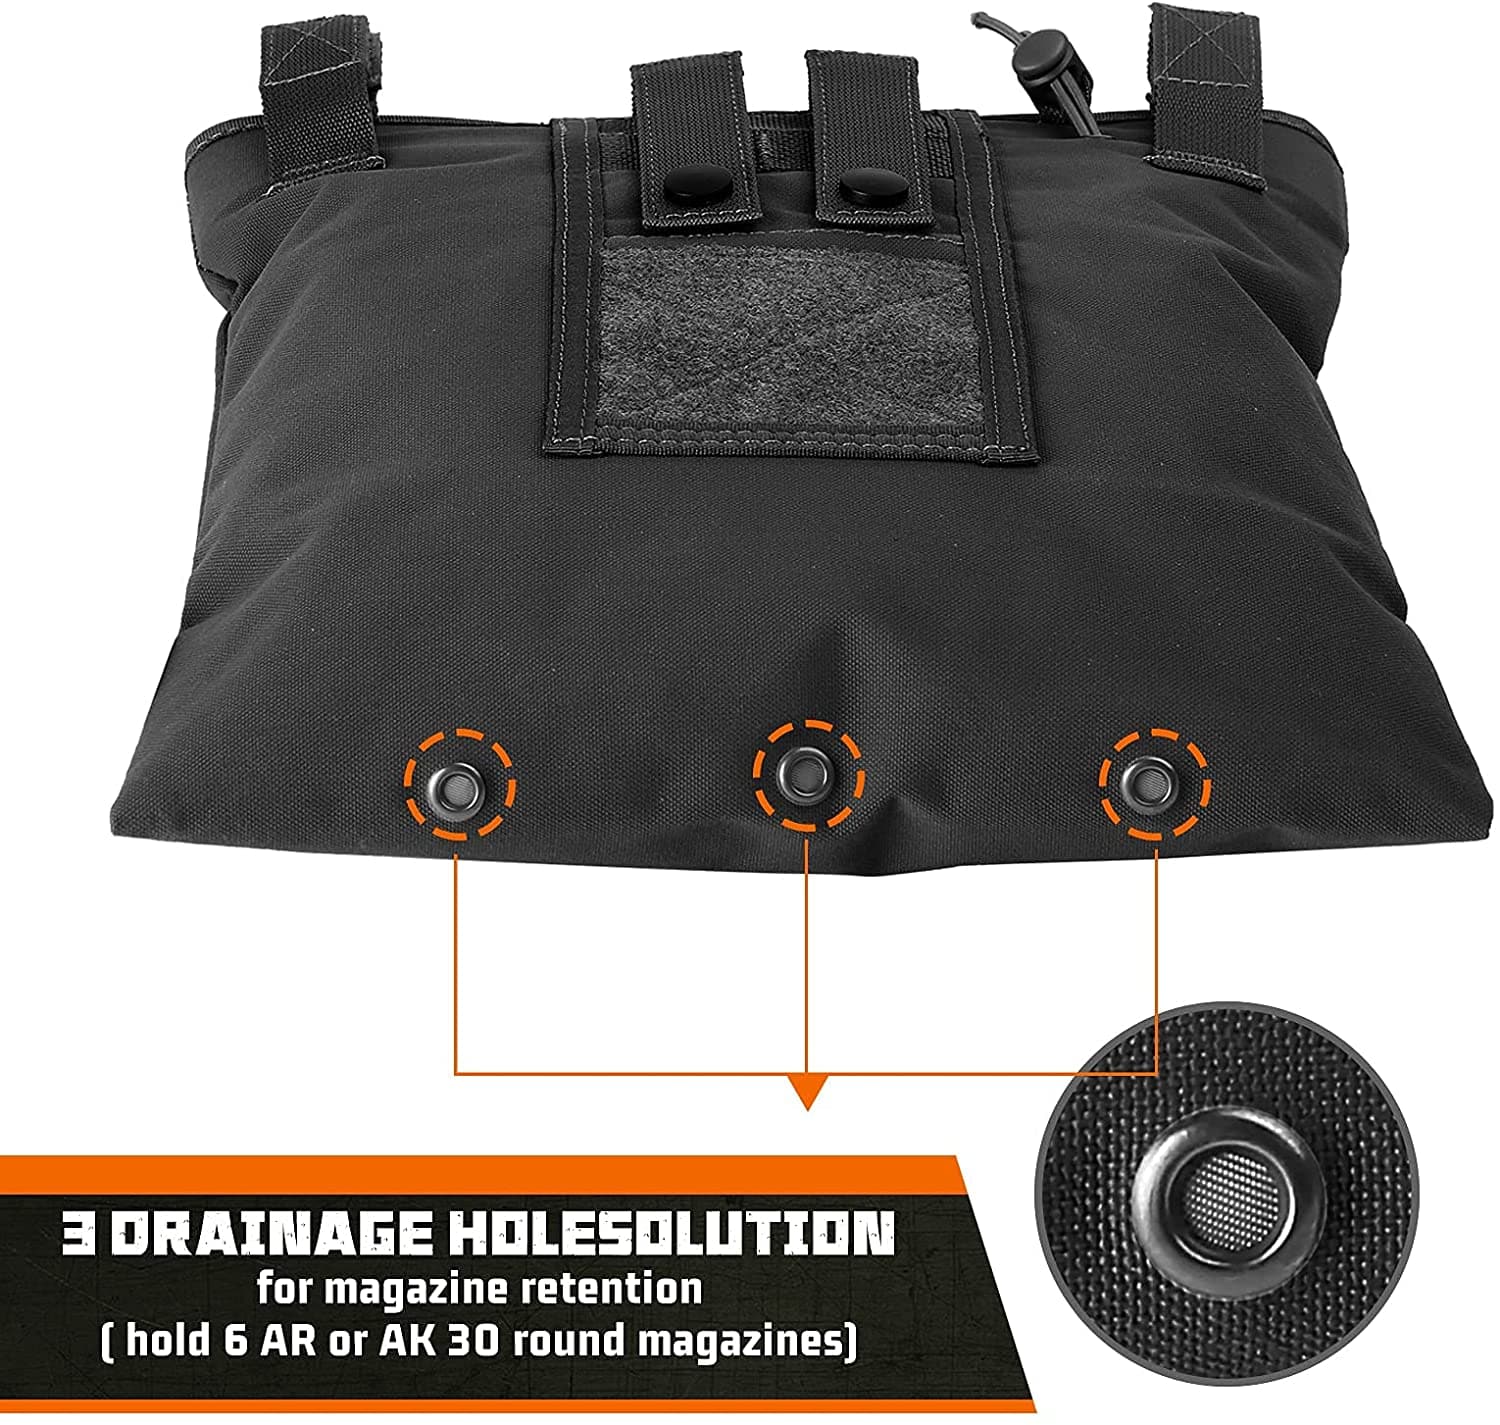 Lightweight Paintball Airsoft Hunting Gear Folding Ammo Recycling Bag